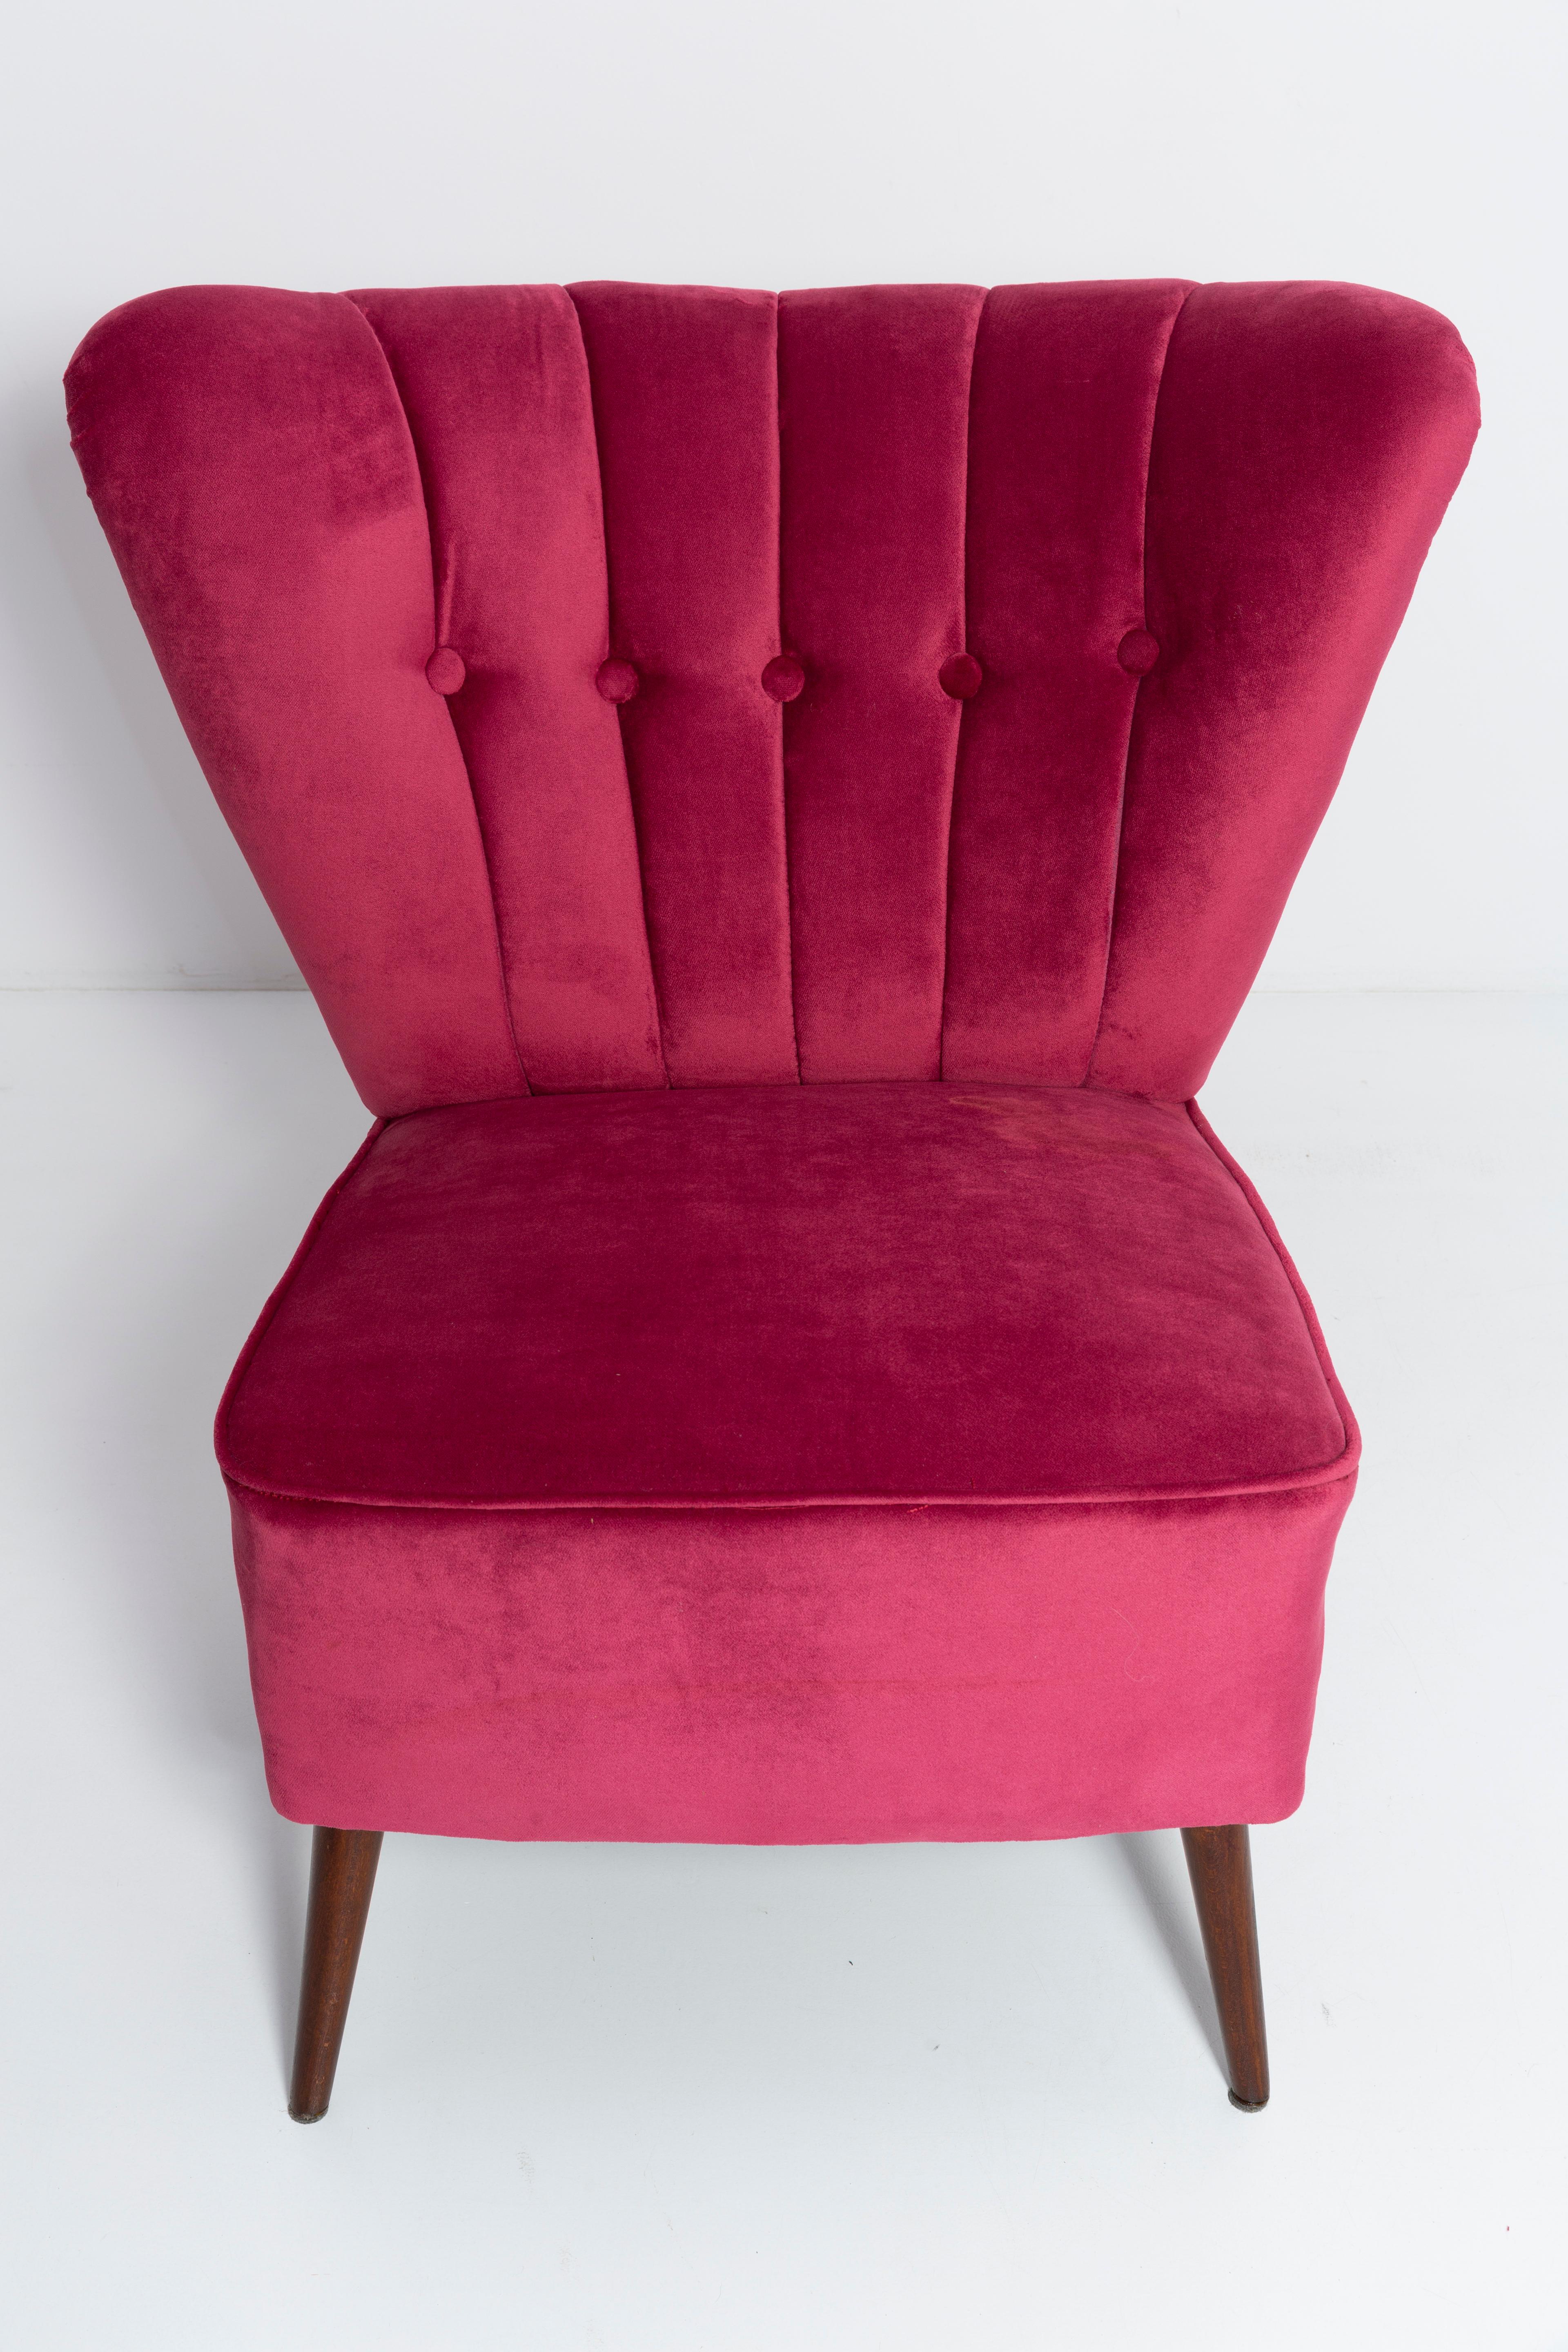 20th Century Four Midcentury Magenta Pink Velvet Club Armchairs, Europe, 1960s For Sale